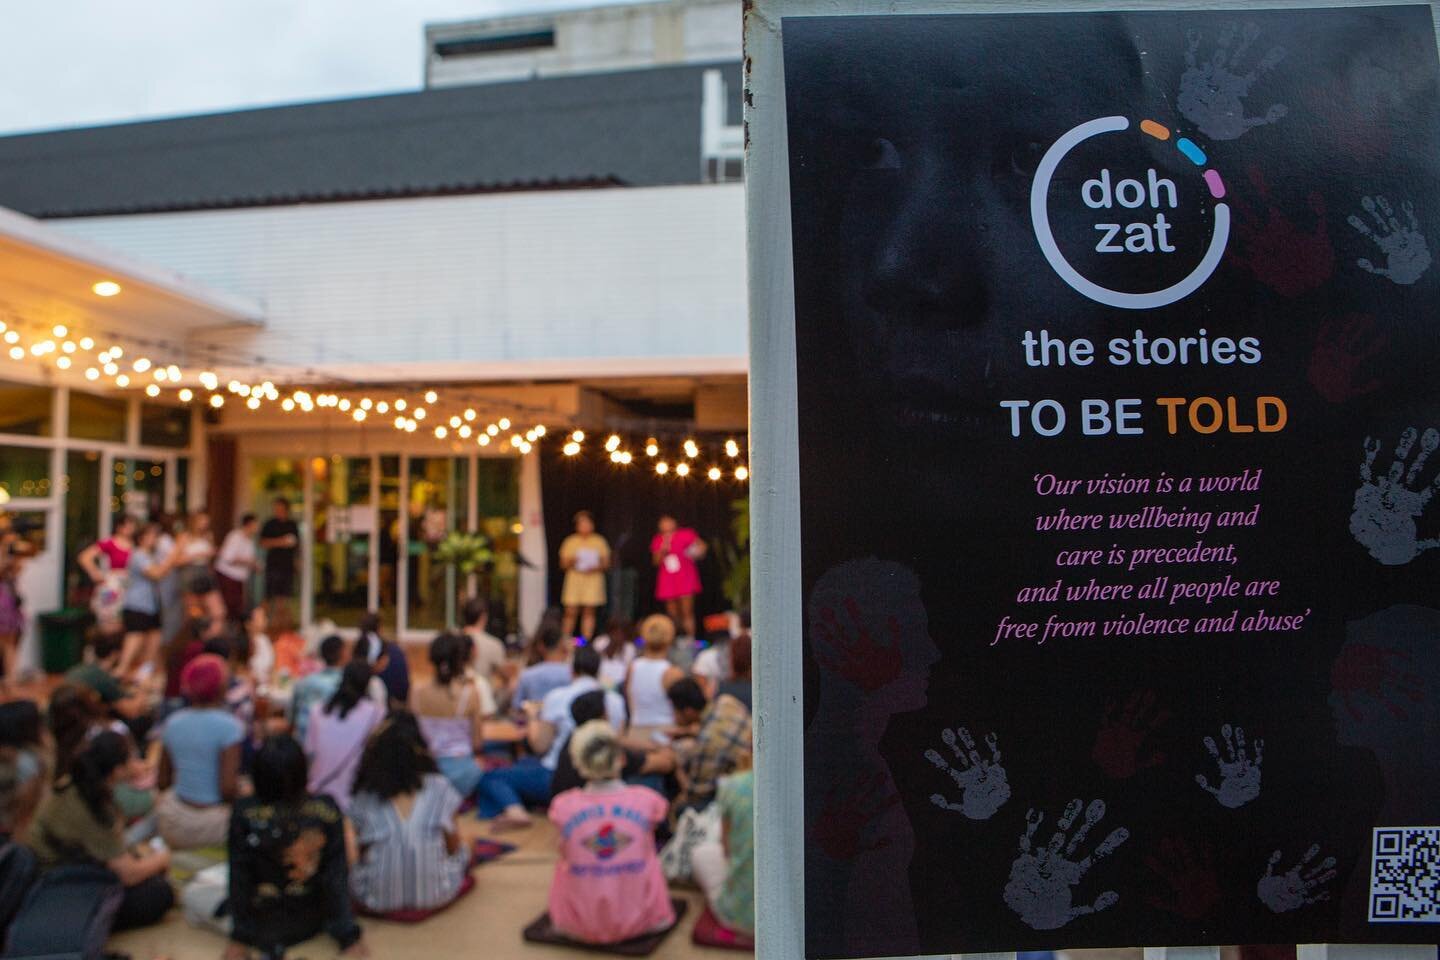 We successfully did the launch event on 15 July in Chiang Mai. Thank you all for joining us and hope you had the wonderful time reading the stories, watching the performance from our amazing performers, enjoying the foods and drinks, and sharing the 